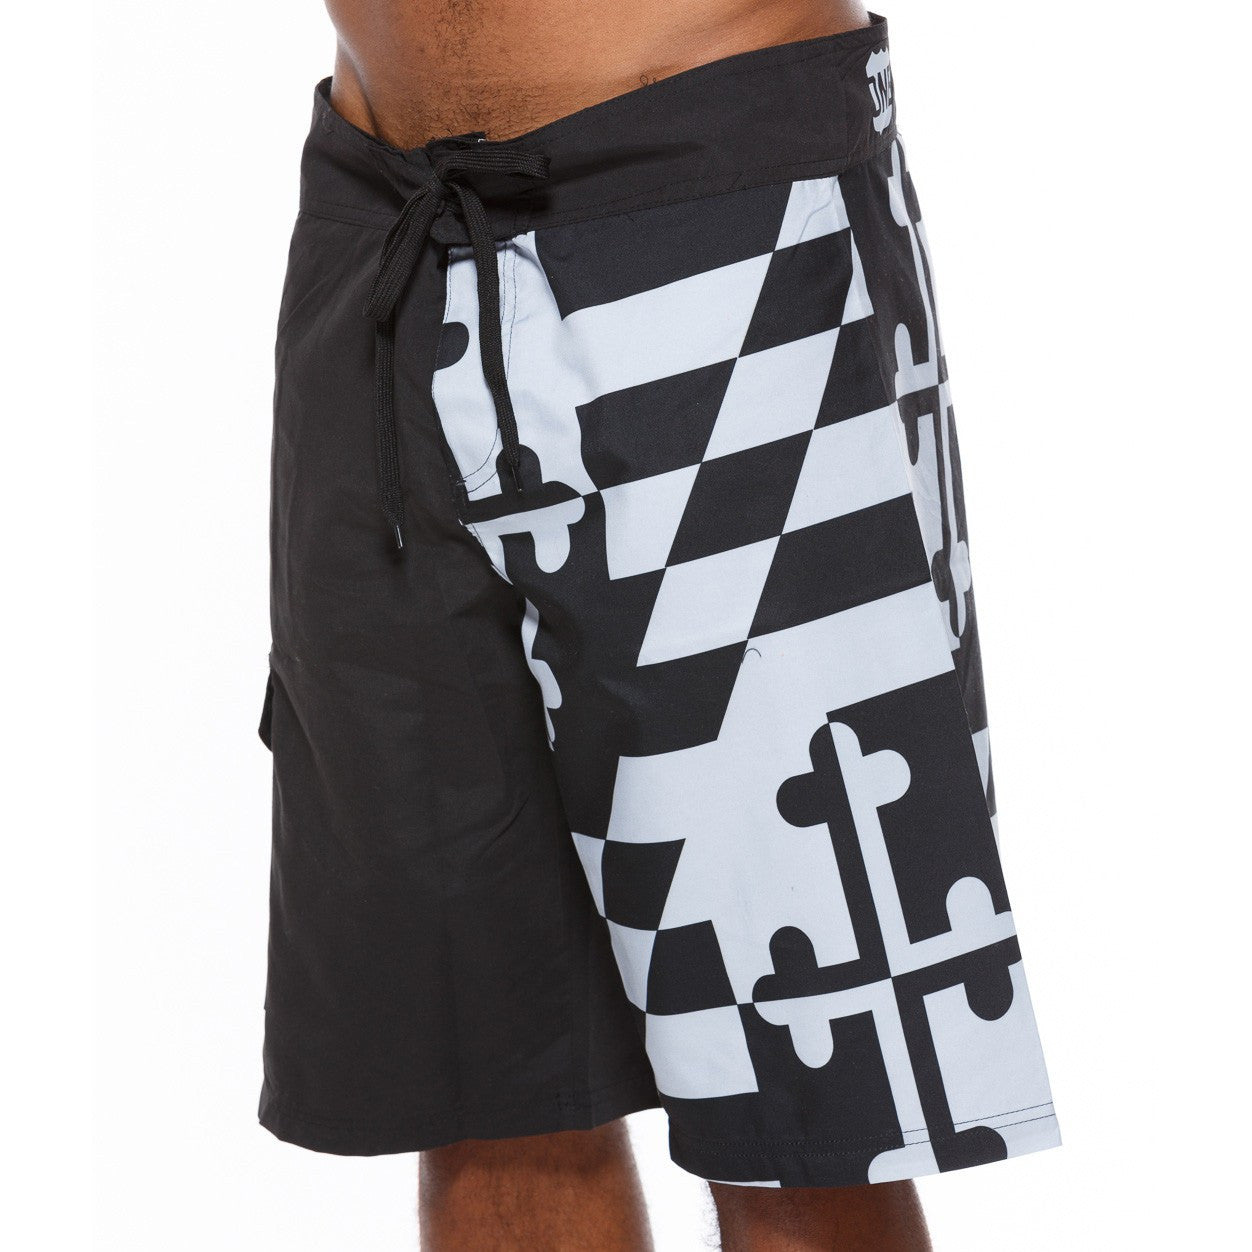 Greyscale Maryland Flag / Board Shorts - Route One Apparel